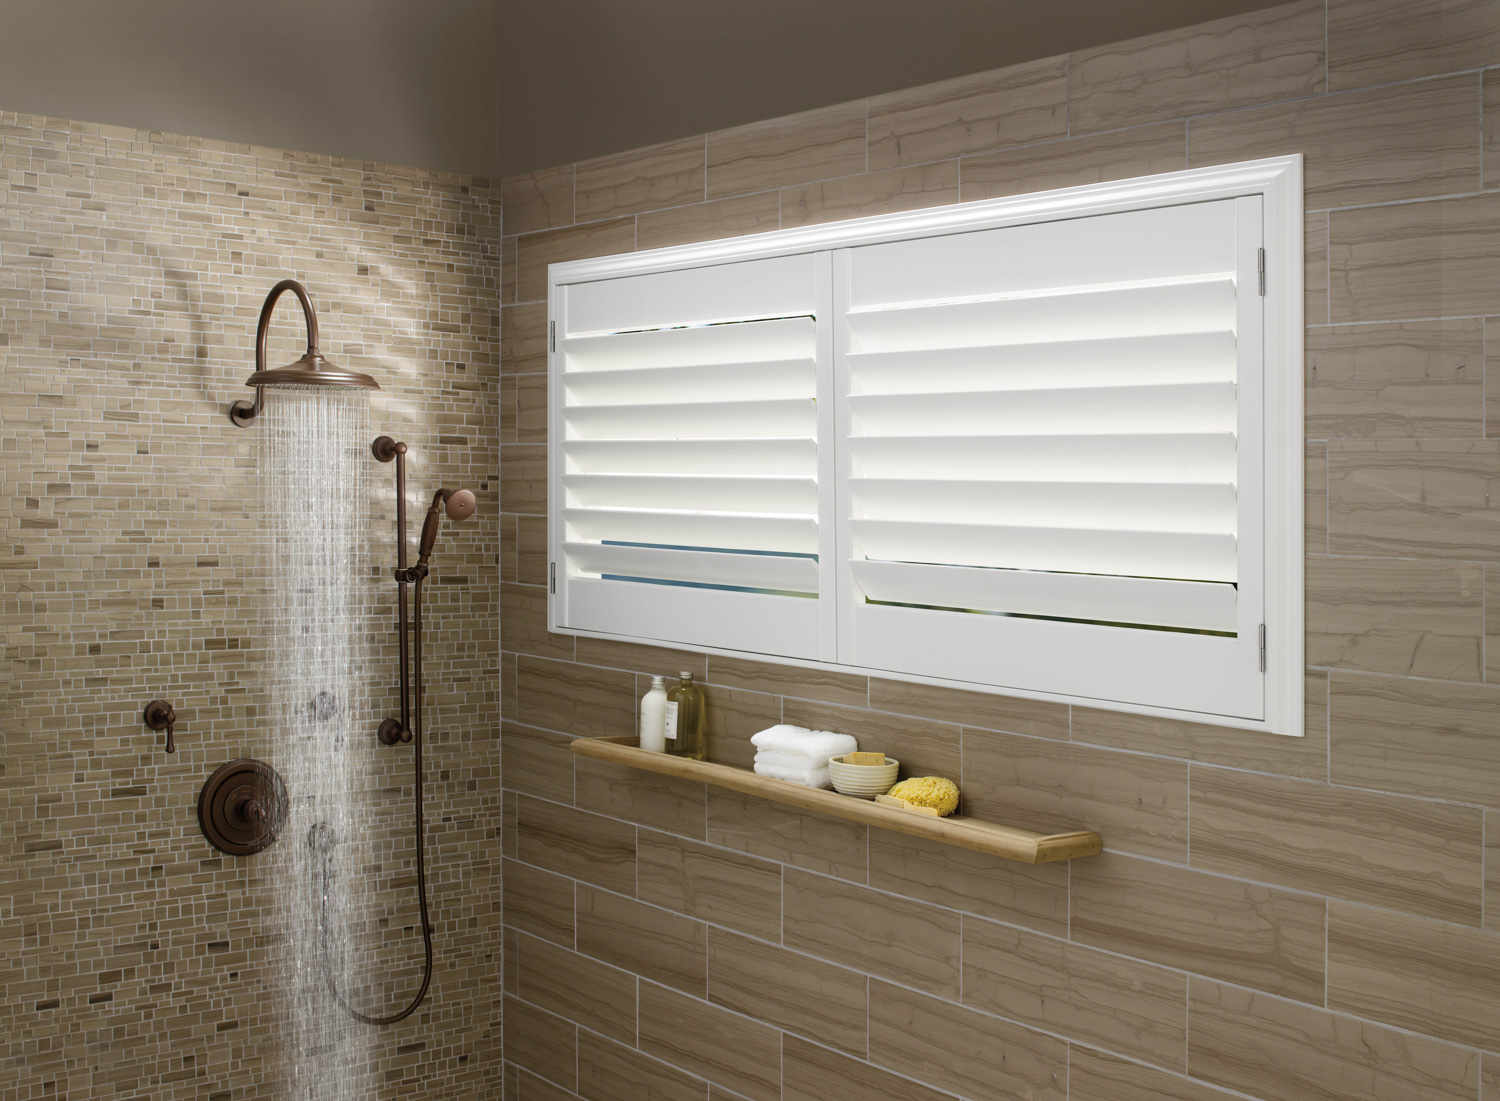 Composite shutters in shower window, providing privacy and style to the bathroom decor.